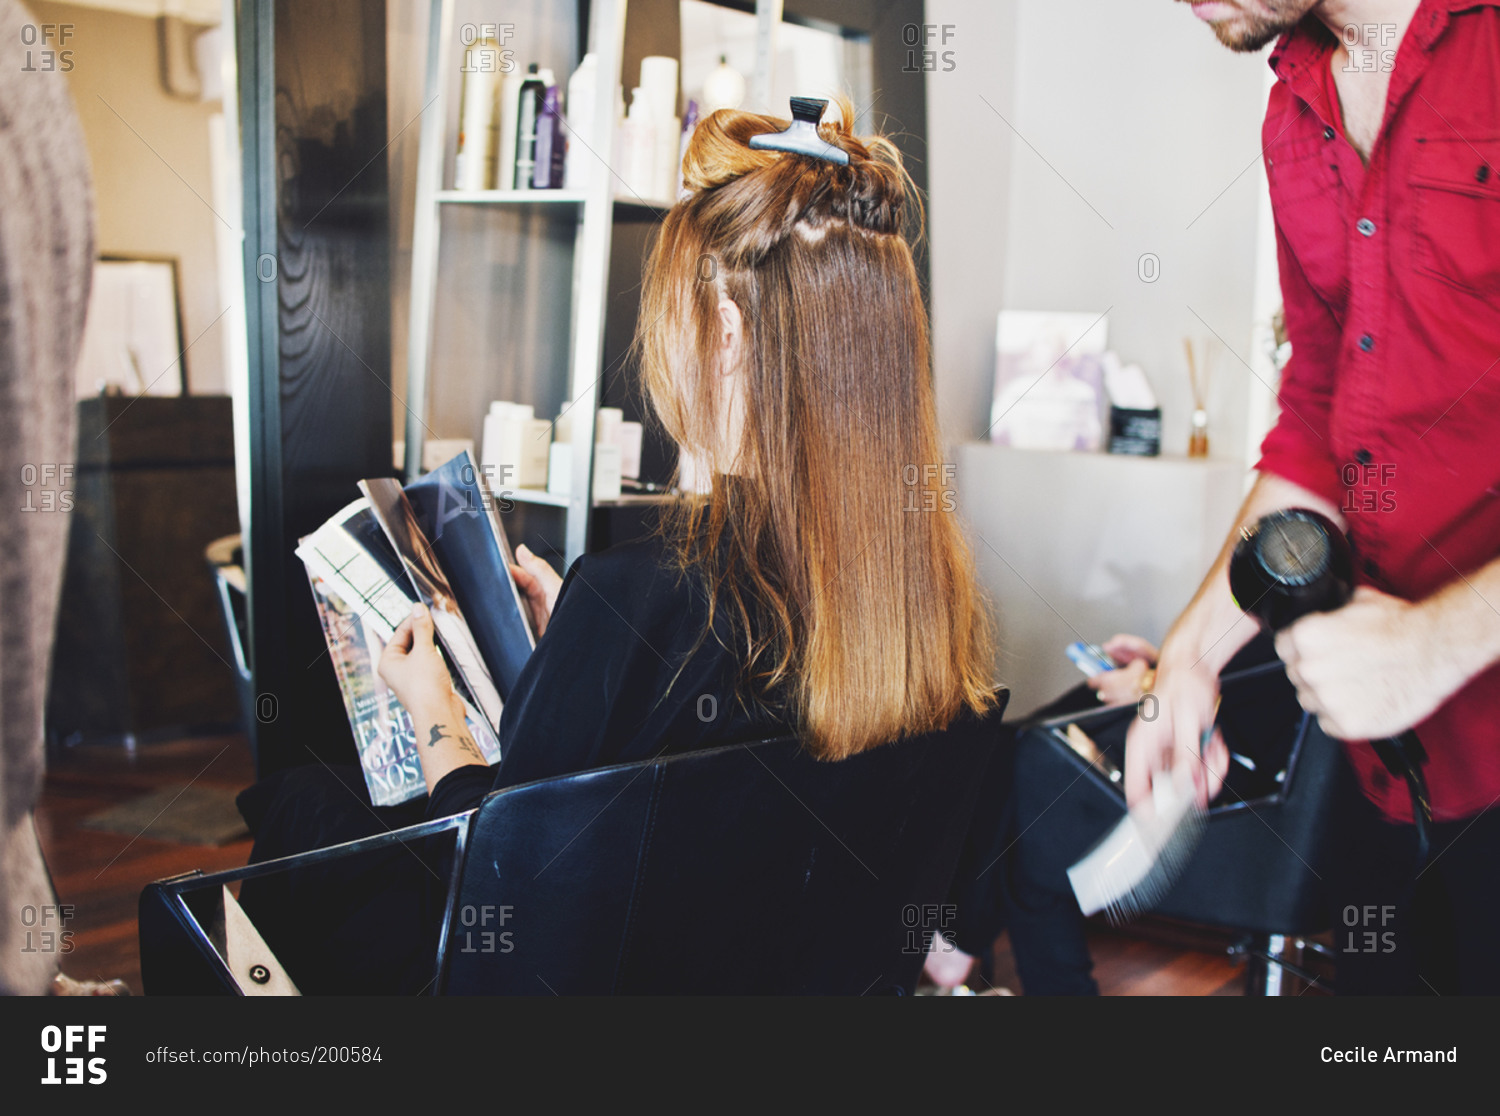 Woman reading a magazine in a salon chair while stylist dries her hair